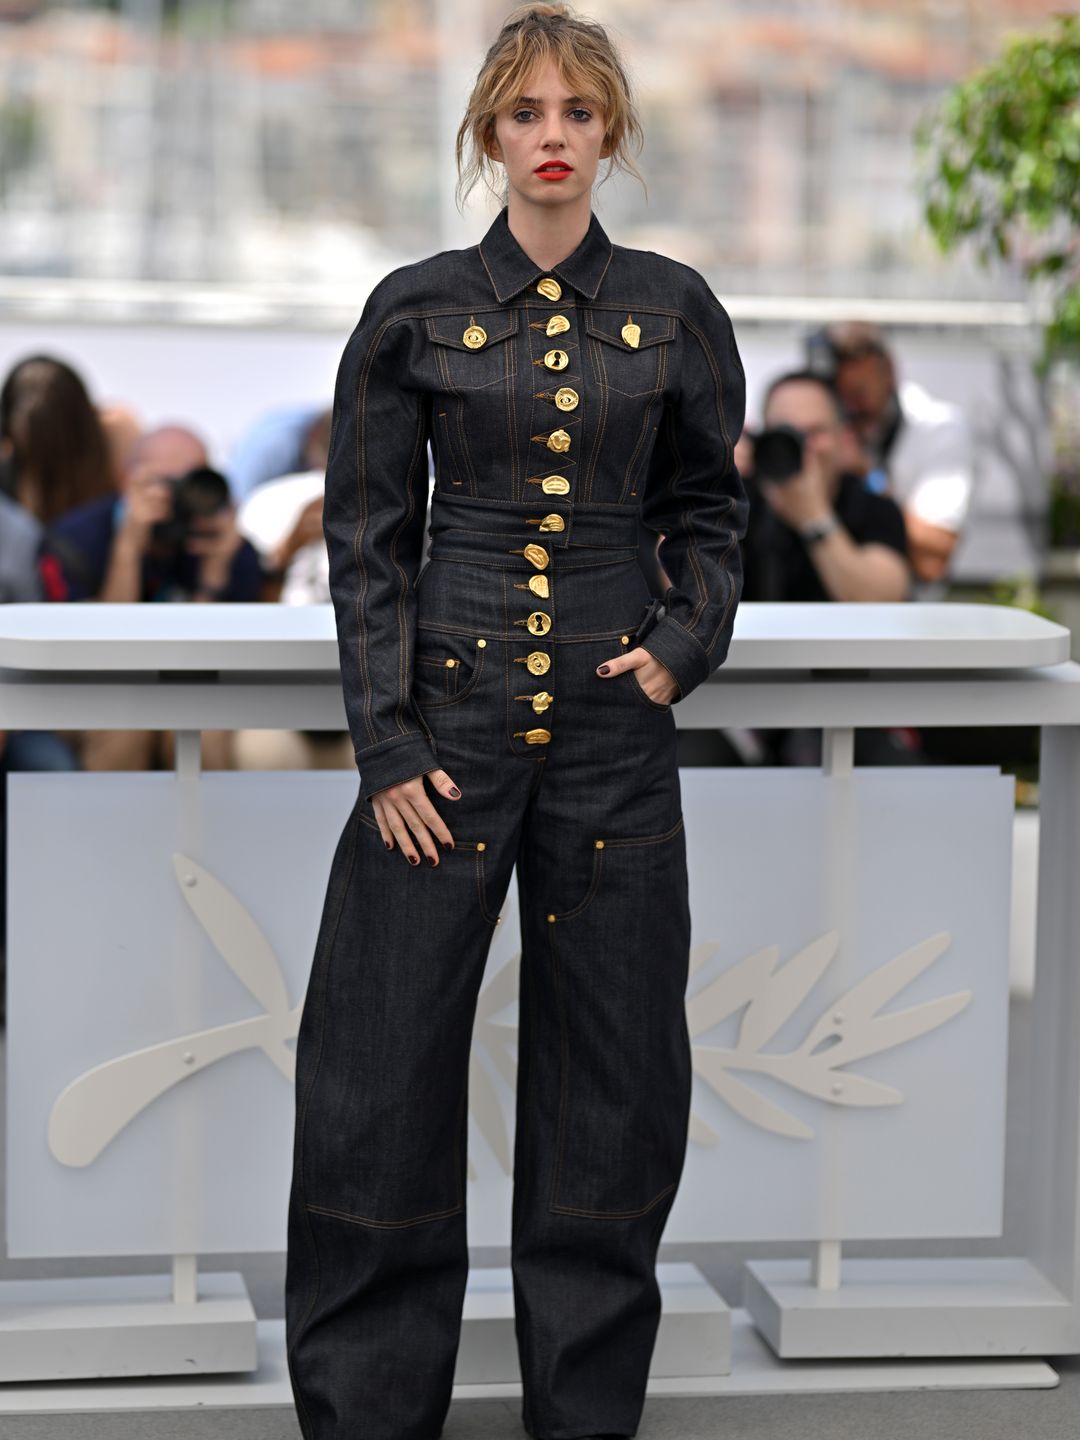 Maya Hawke looked cool in a dark denim jumpsuit with gold button adornments 